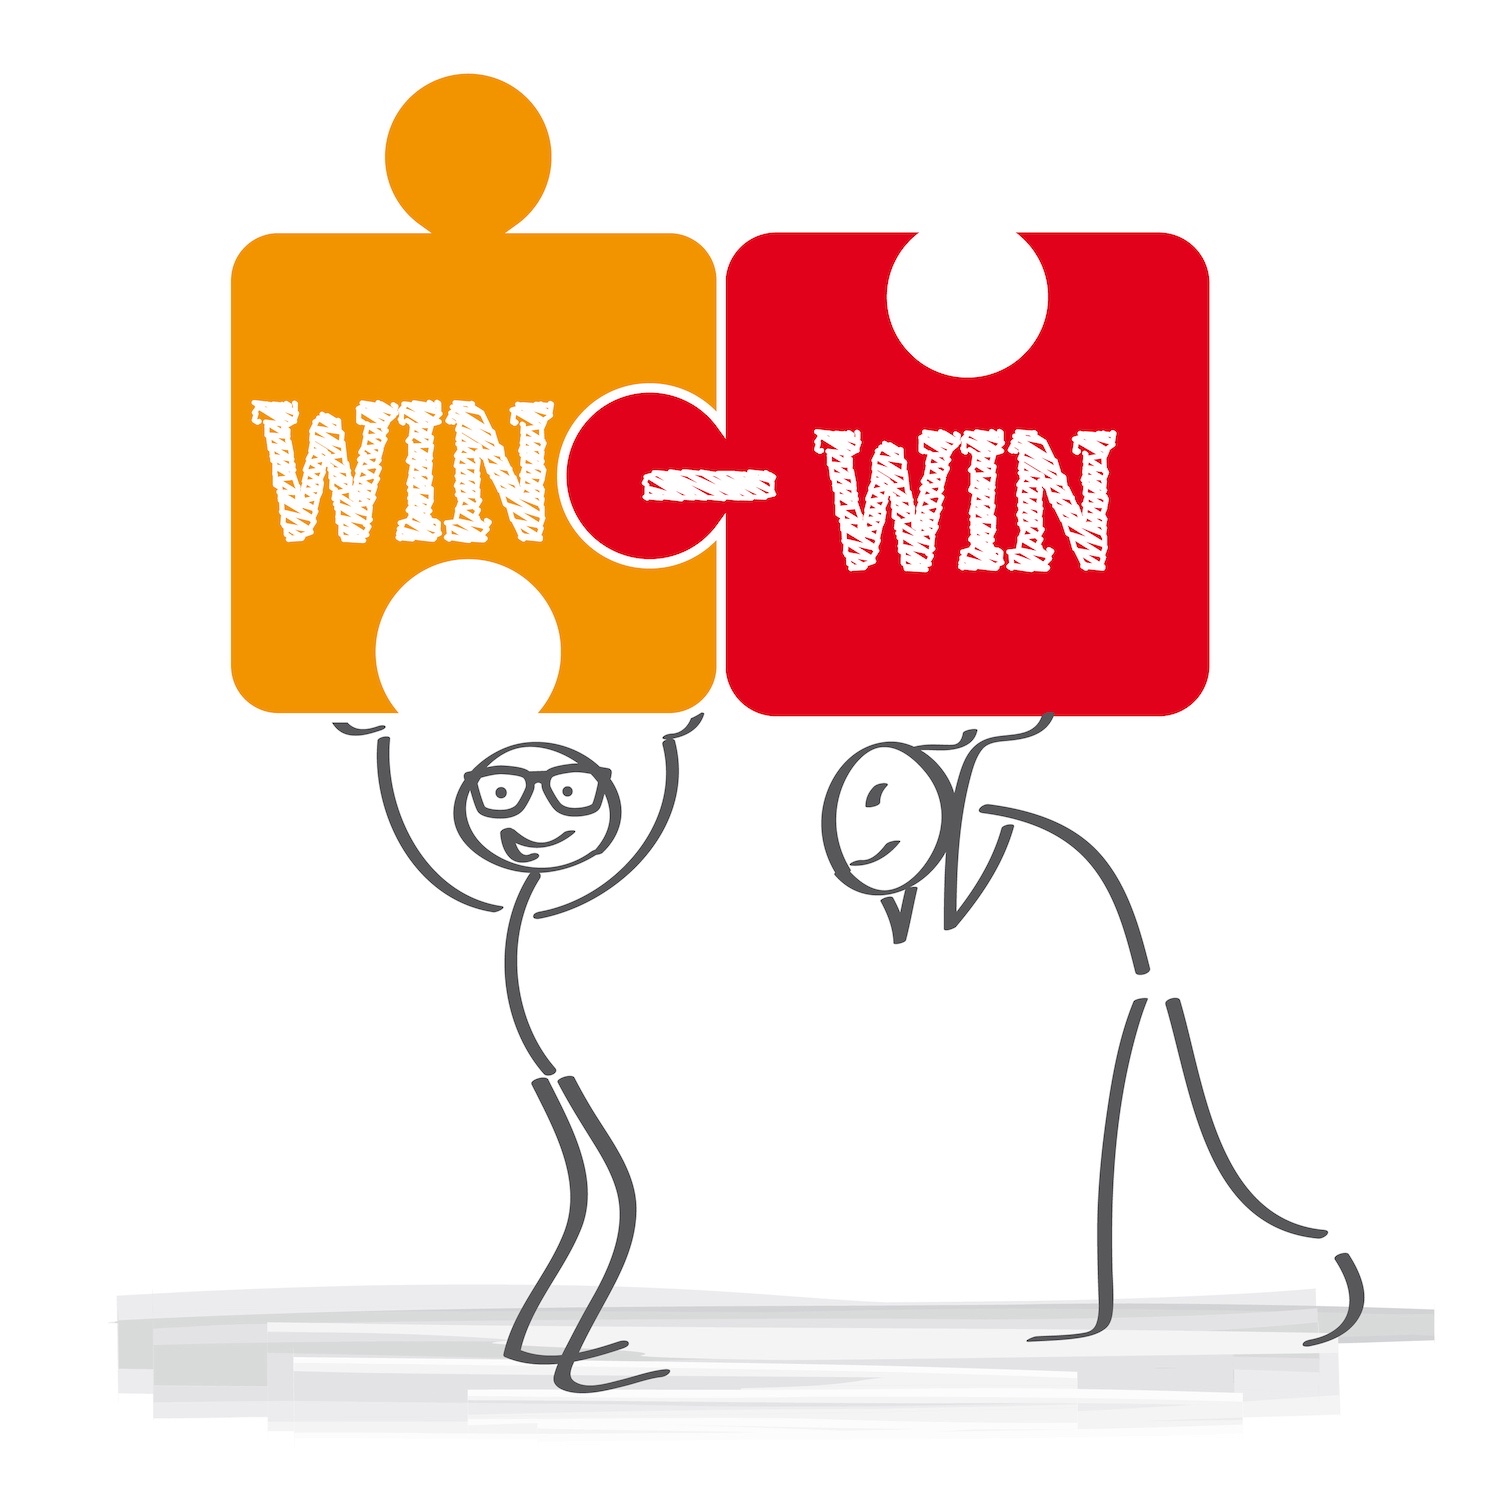 A clip art image of productive conflict showing a win-win situation